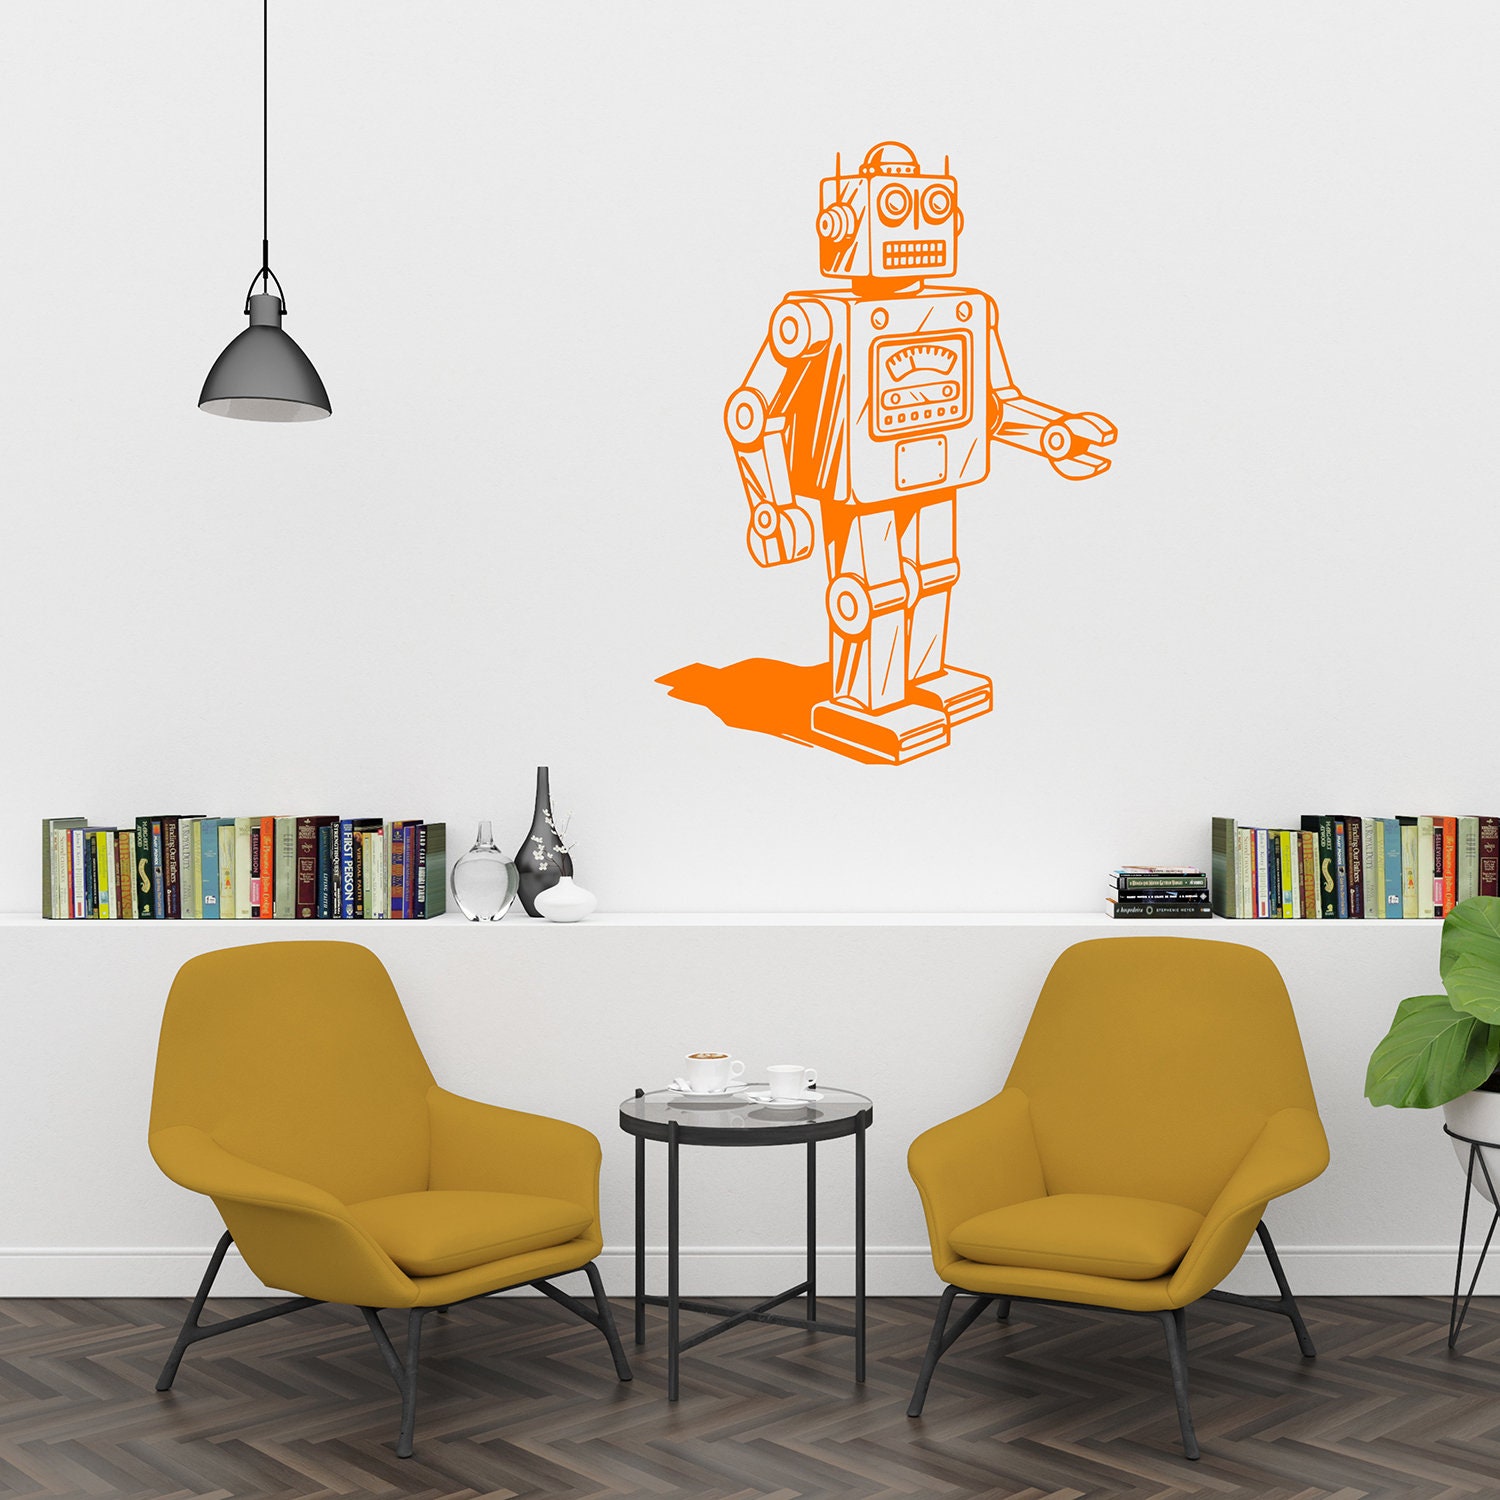 Retro Robot Wall Decal 1950's Style Robot Atomic Age Decal Toy Decal  Boy's Bedroom Wall Decal Home Decor Wall Stickers Z697 - AliExpress